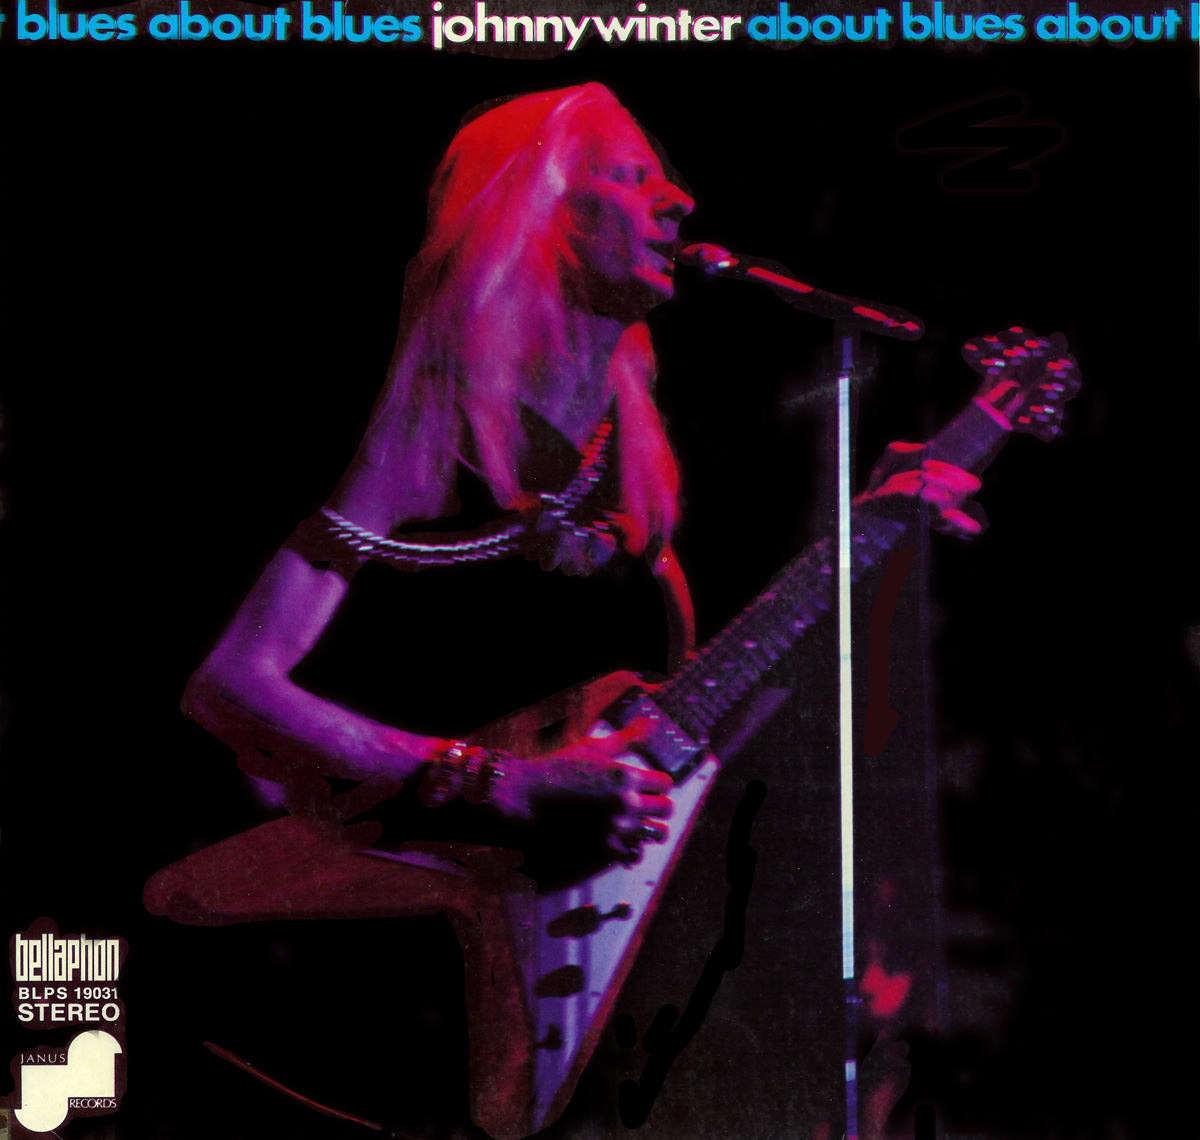 Another release of About Blues, this time the front cover photo shows Johnny playing a Red Gibson Flying V